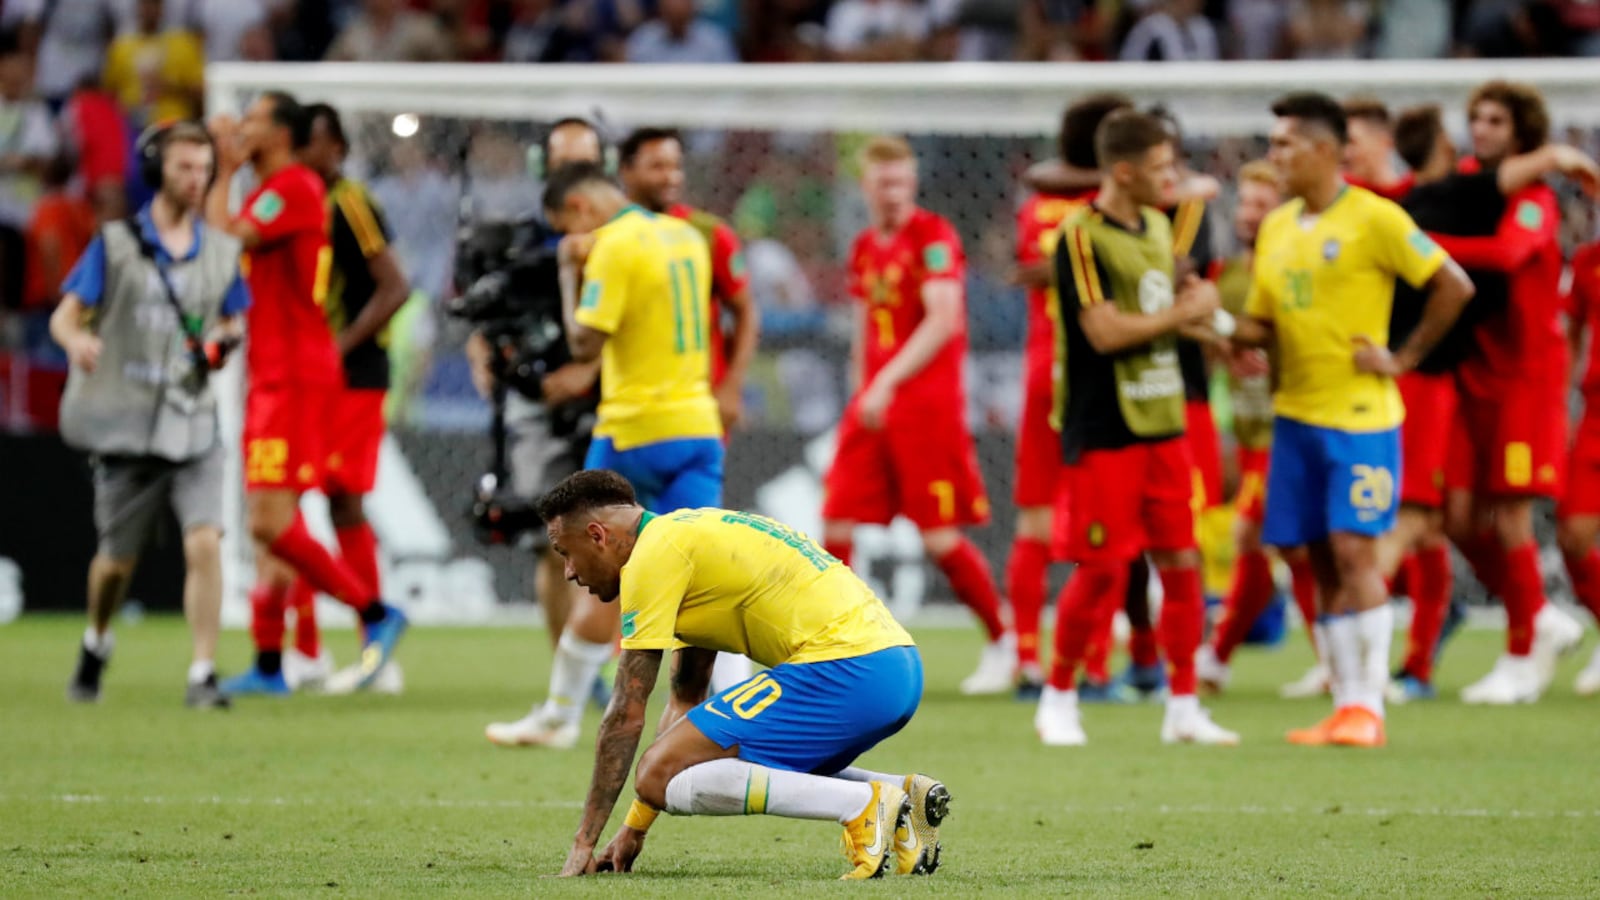 Brazil team review 2018 for Russia FIFA World Cup